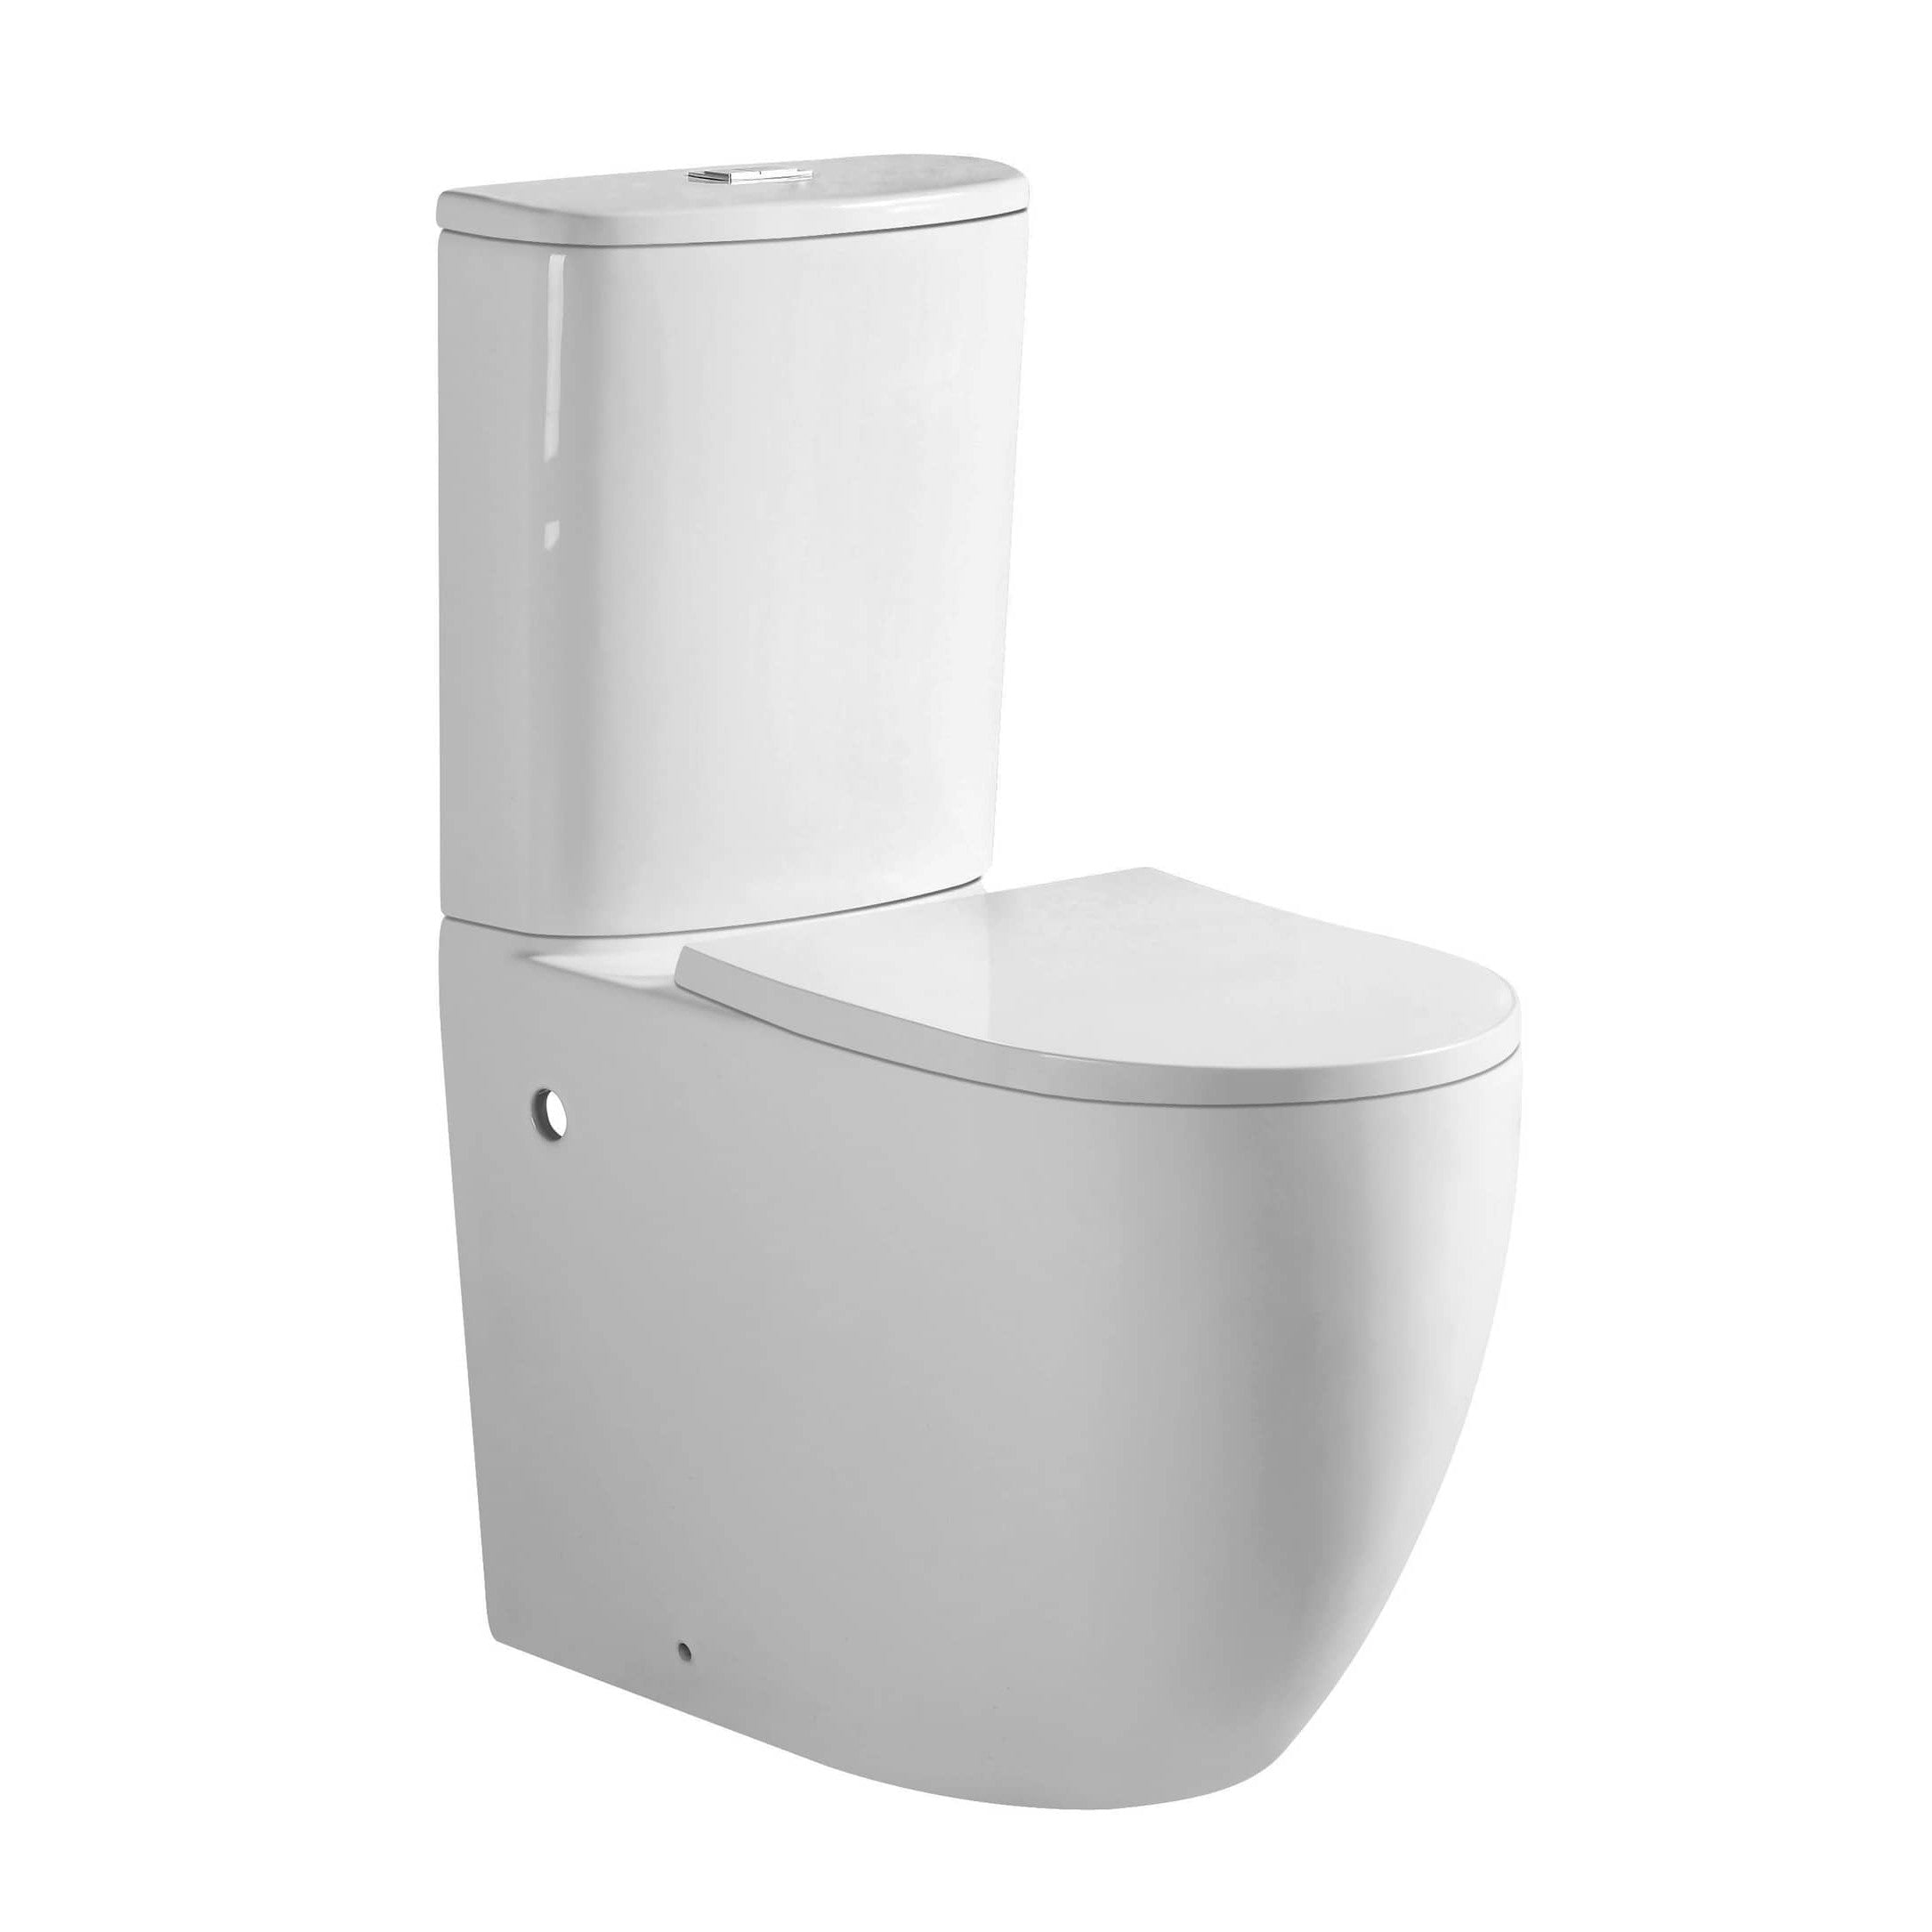 ECT Global Romeo Rimless Wall Faced Toilet Suite